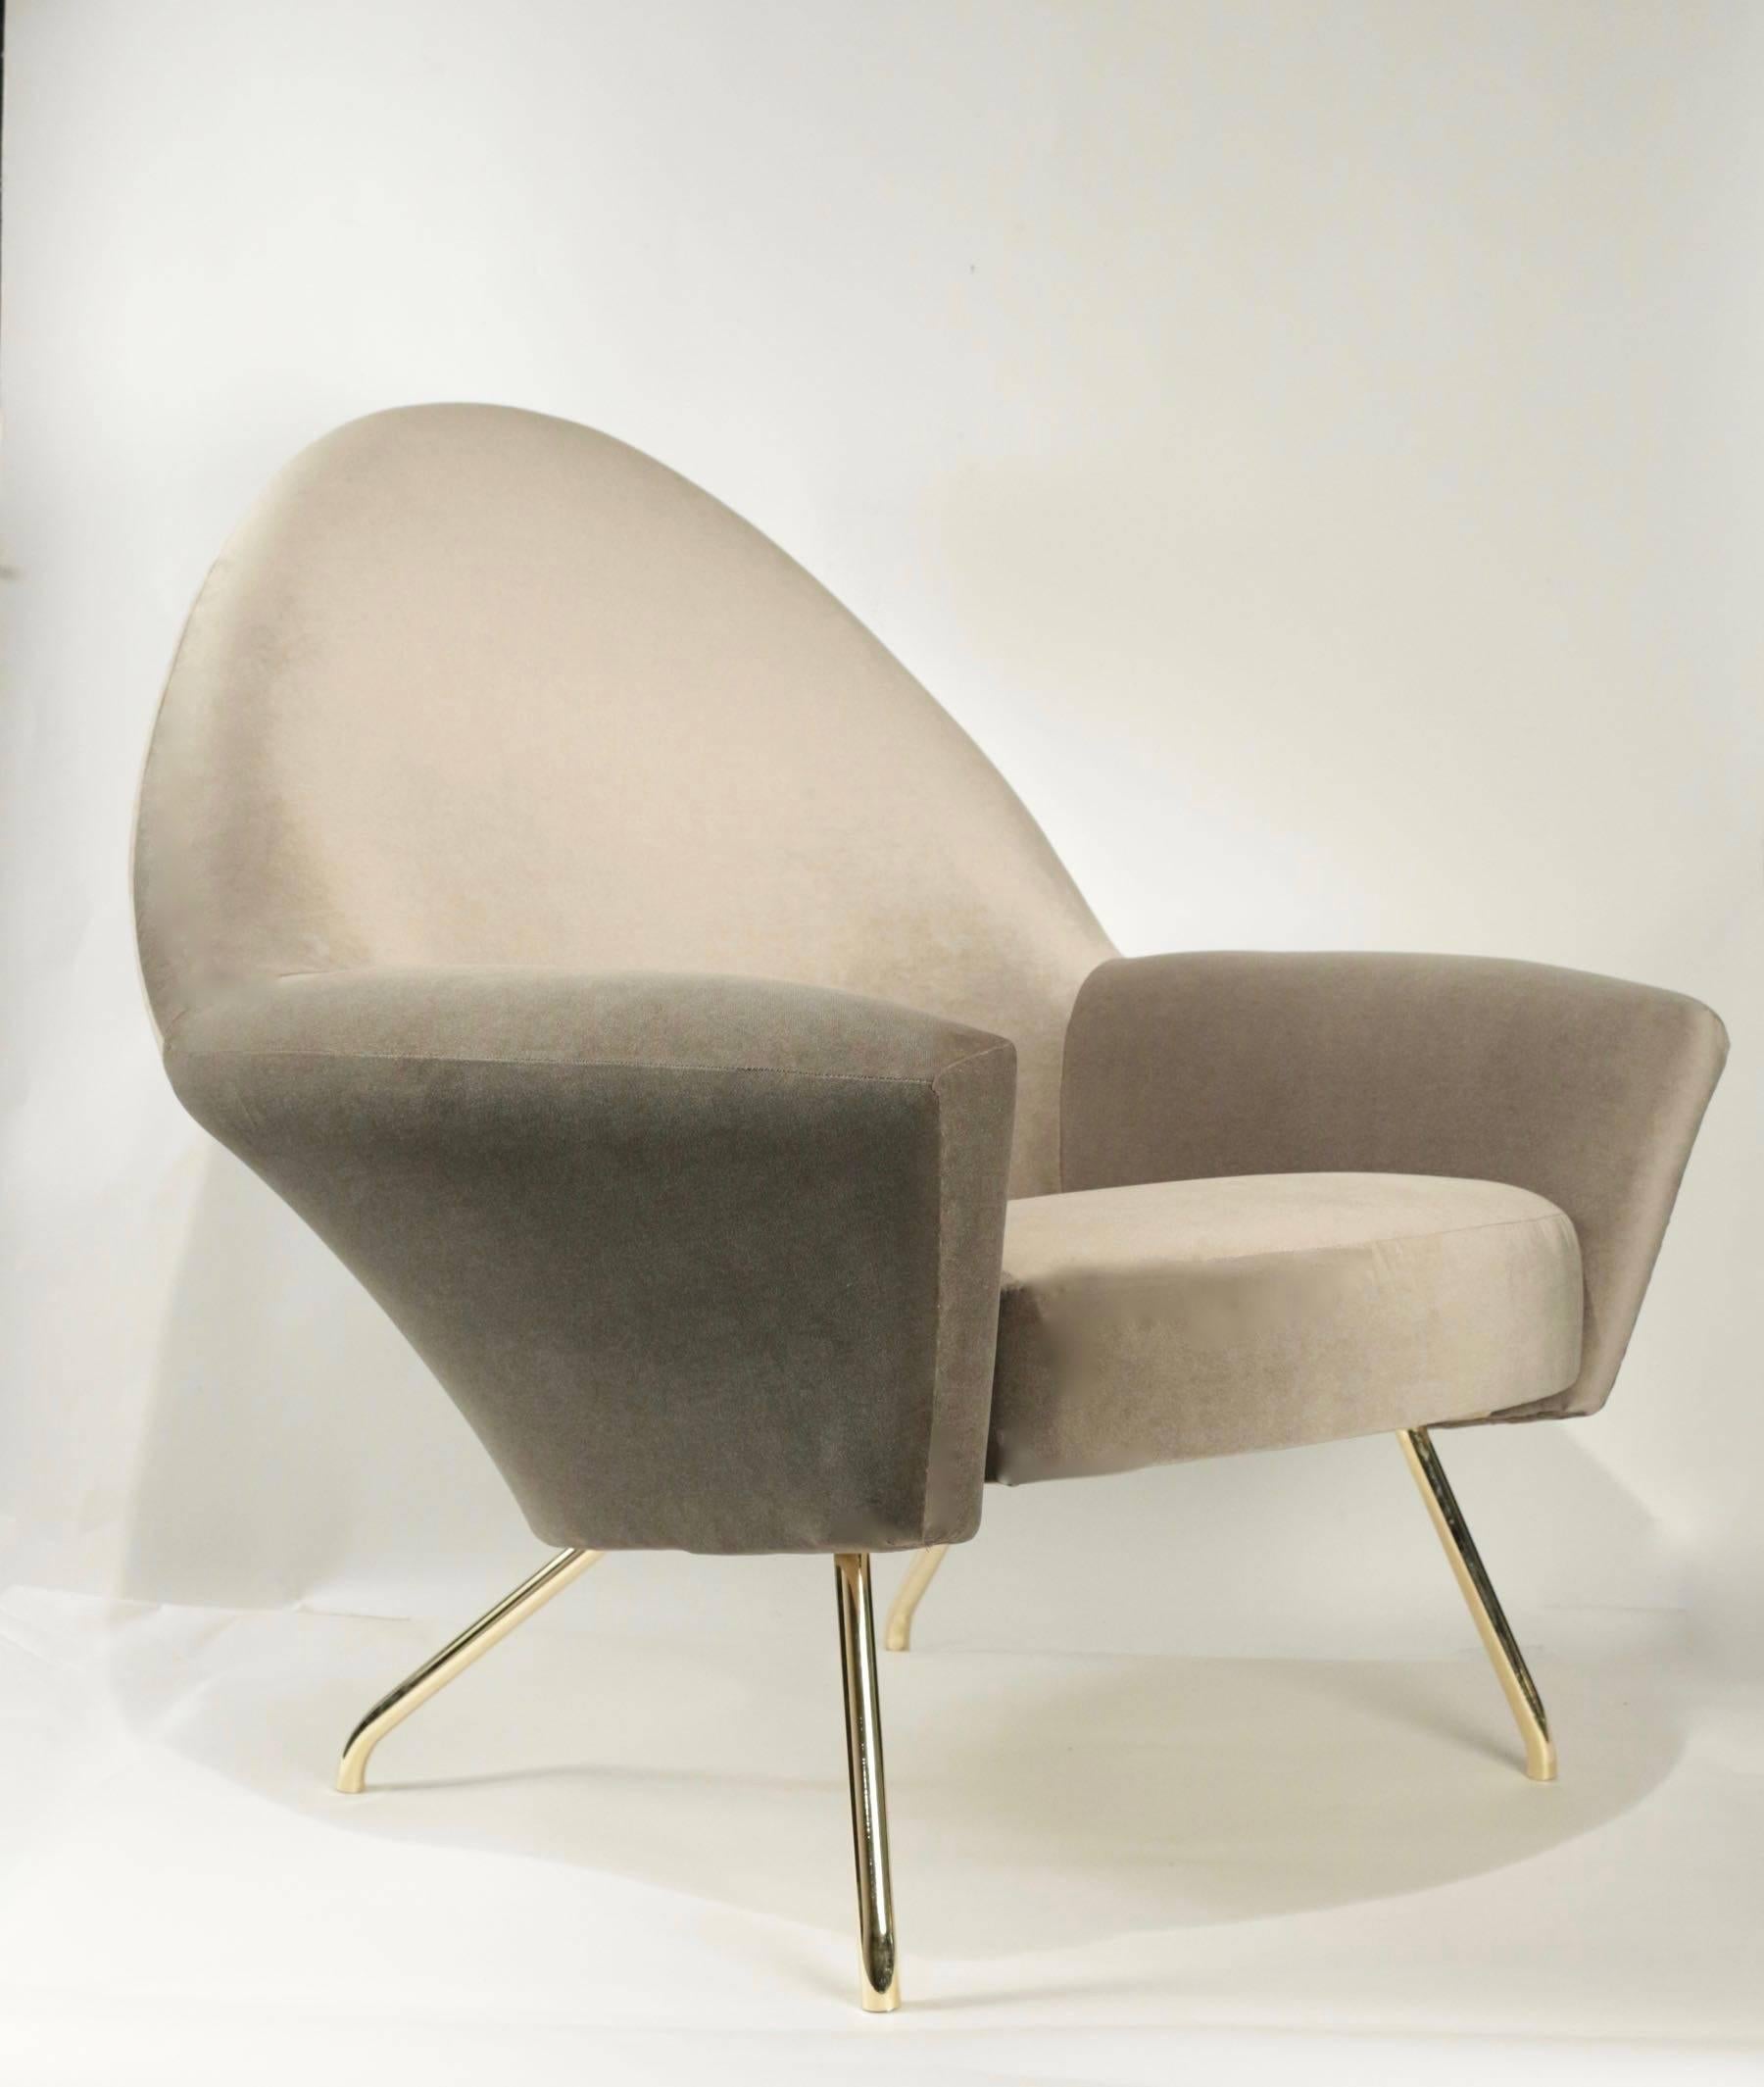 1954 living room set, model 770 by Joseph Andre Motte for Steiner.

Elegant living room set compose by two armchairs and one sofa. Remade upholstery and fabric in soft grey velvet. Iconical model of Joseph Andre Motte, he has achieved both a sleek